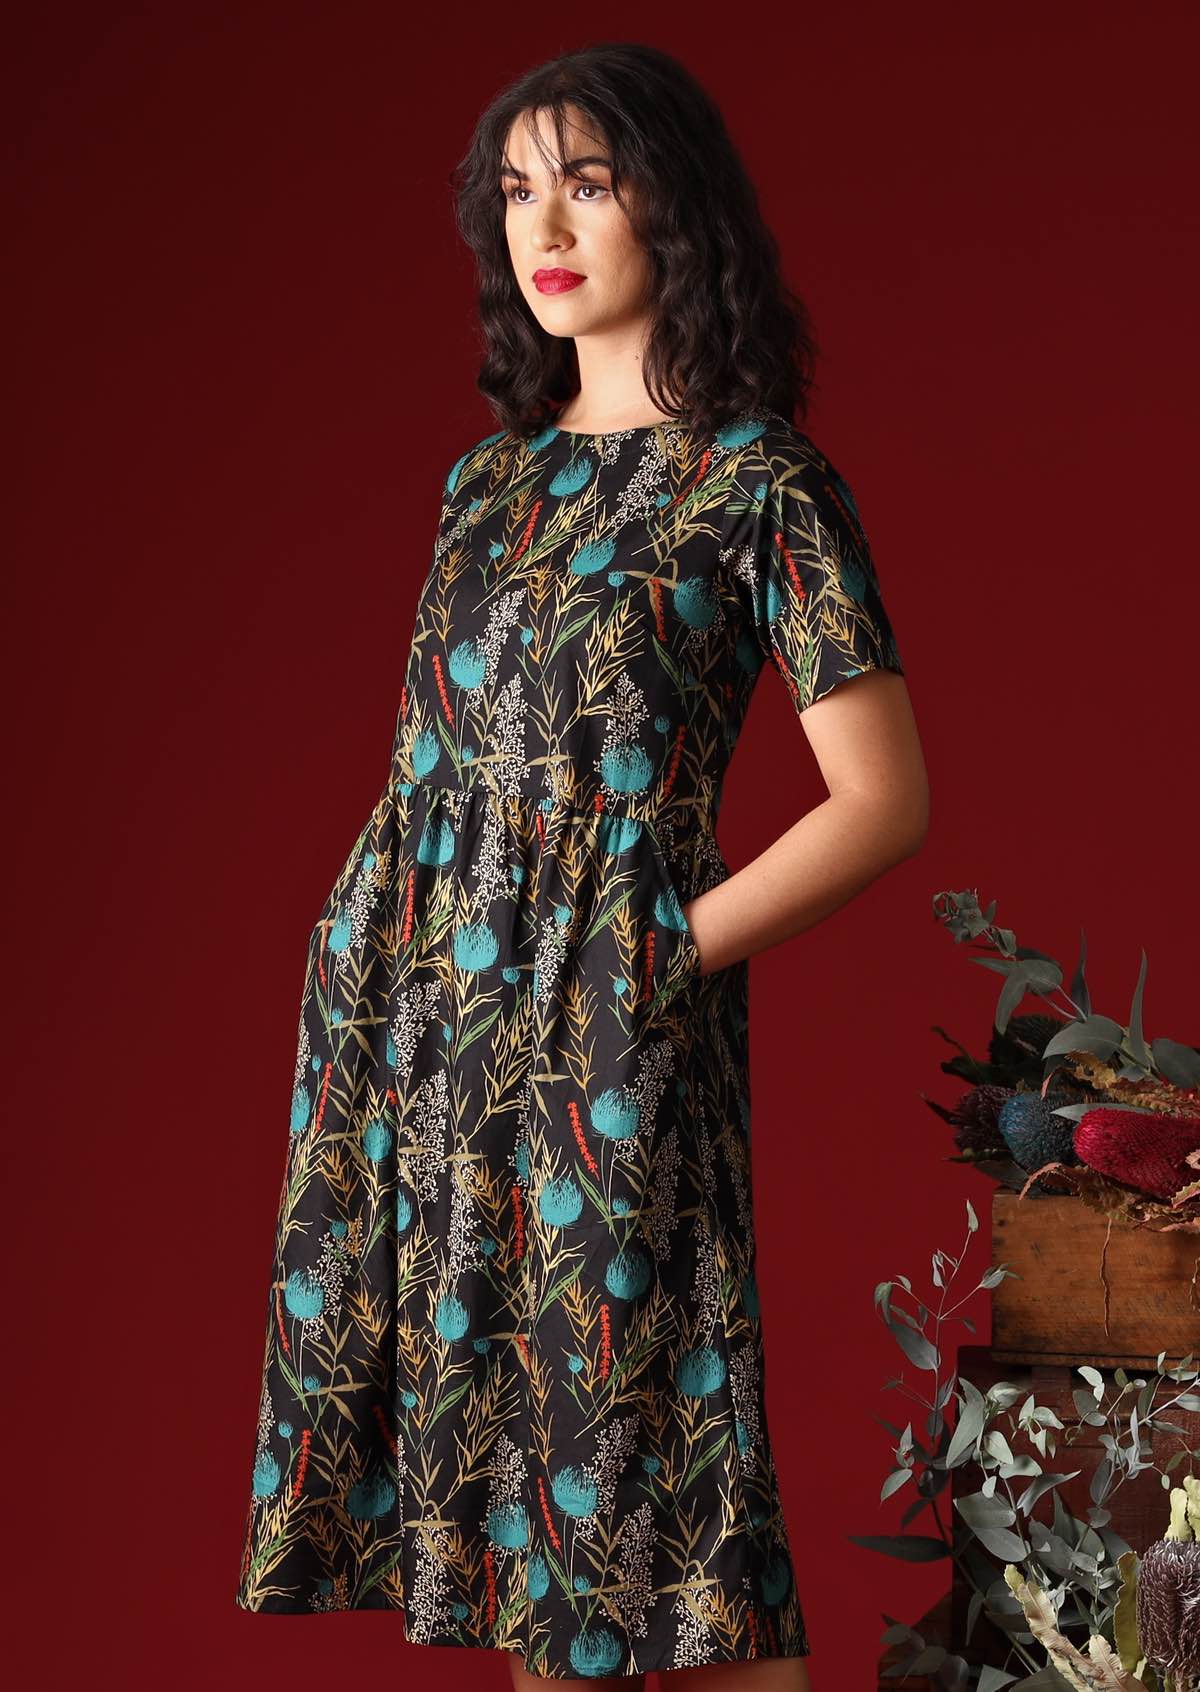 Model wears a 100% cotton floral black base dress with pops of blue and red. This loose fitting, below knee length dress has short sleeves, a high round neckline and pockets.